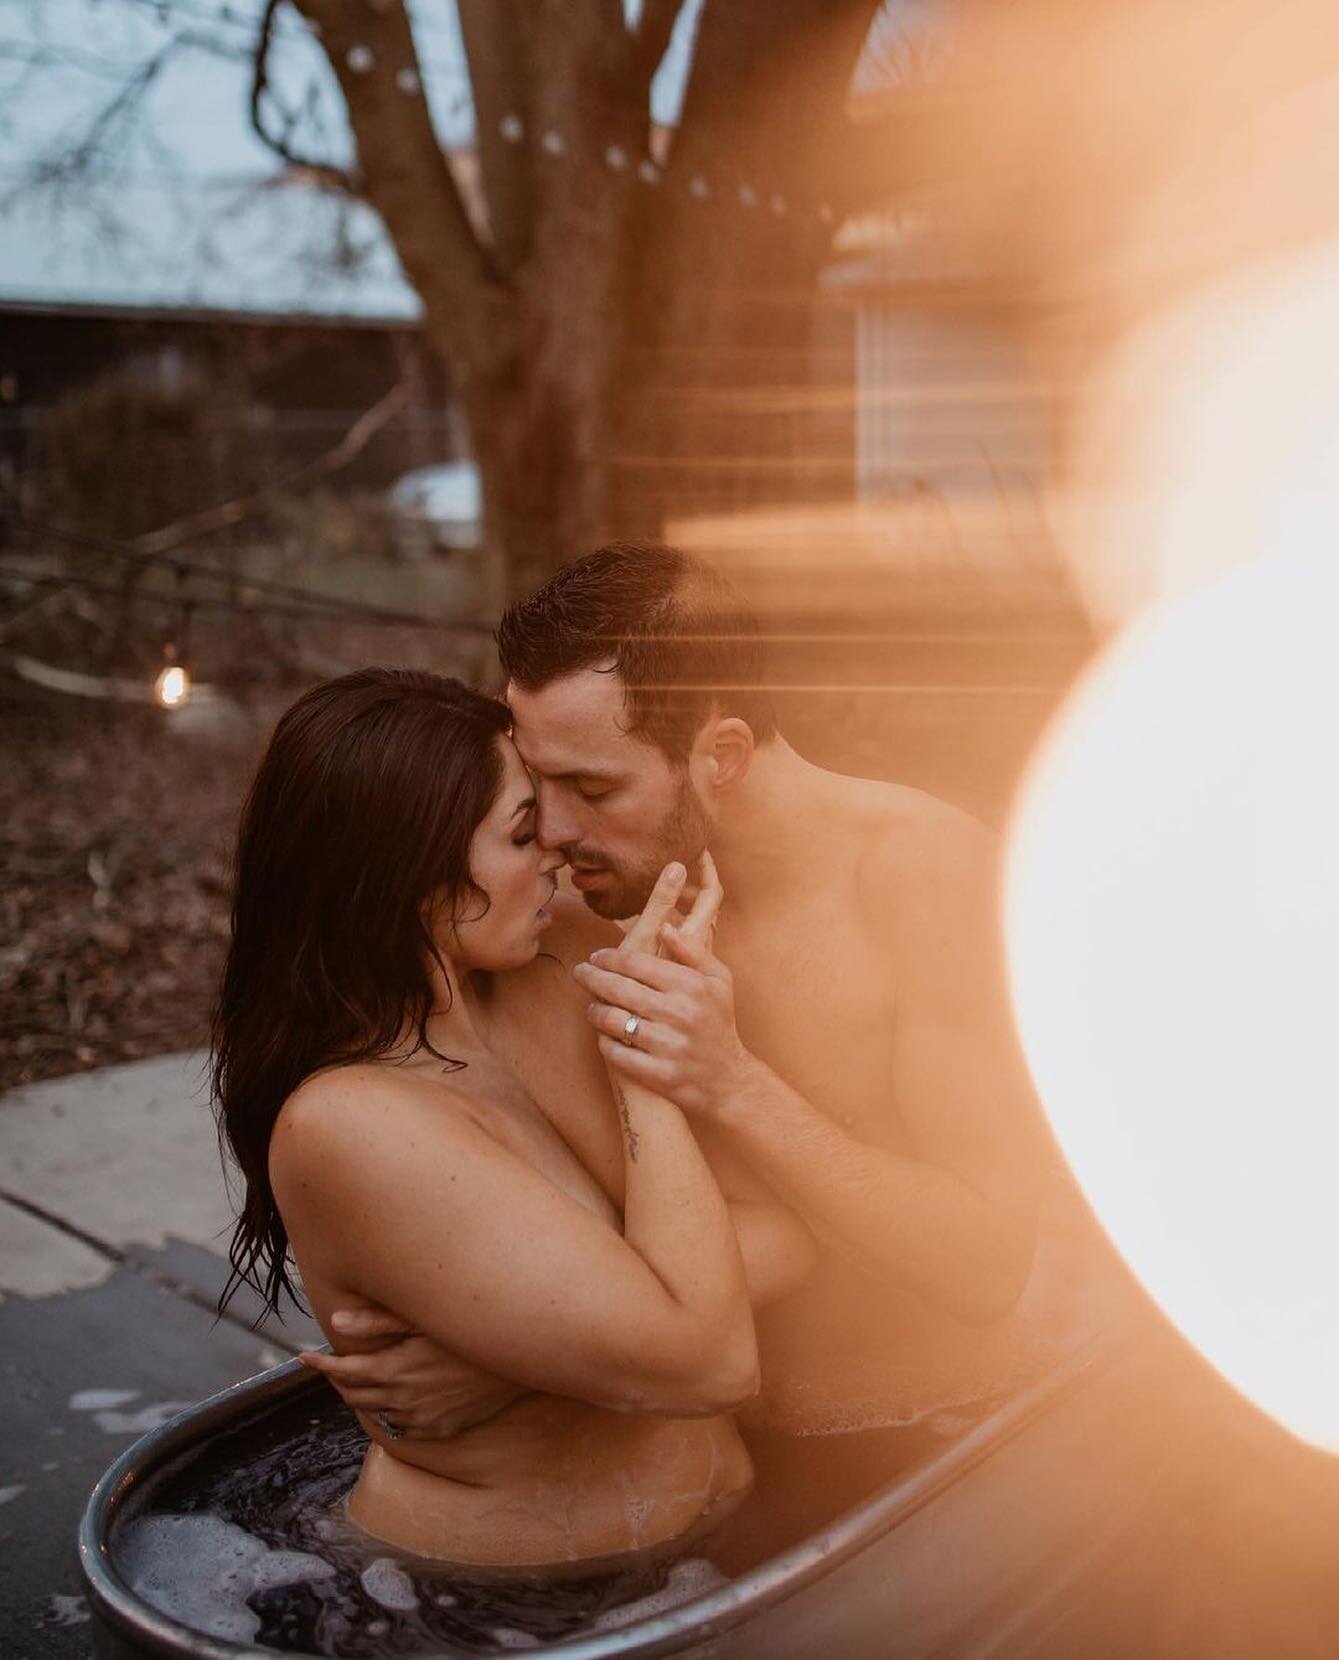 Take this as a sign to cool down with someone you love!  It&rsquo;s hot out there friends!  Loving this shot 📸 by @brookeduclosphoto edited with @wkpresets ⚡️
 &bull;
Host: @fieldoflilliesphotography 
MUA: @alexi.sage 
&bull;
&bull;
&bull;
&bull;
#w